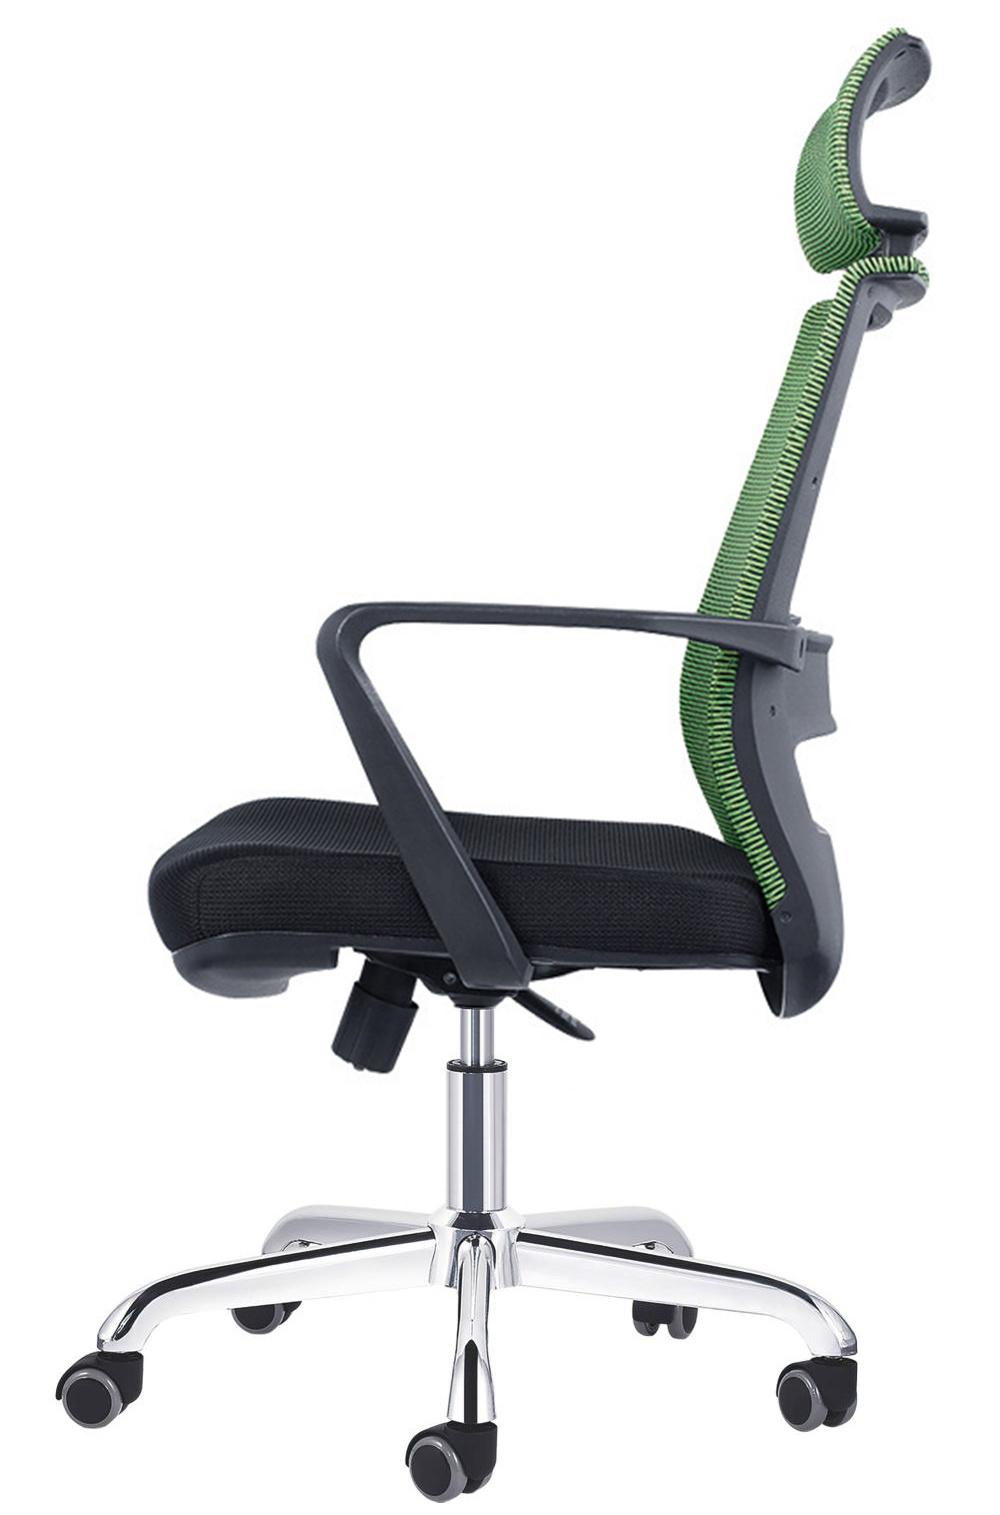 Modern High Quality Mesh Back Office Chair Armrest Chinese Furniture Office Computer Chair